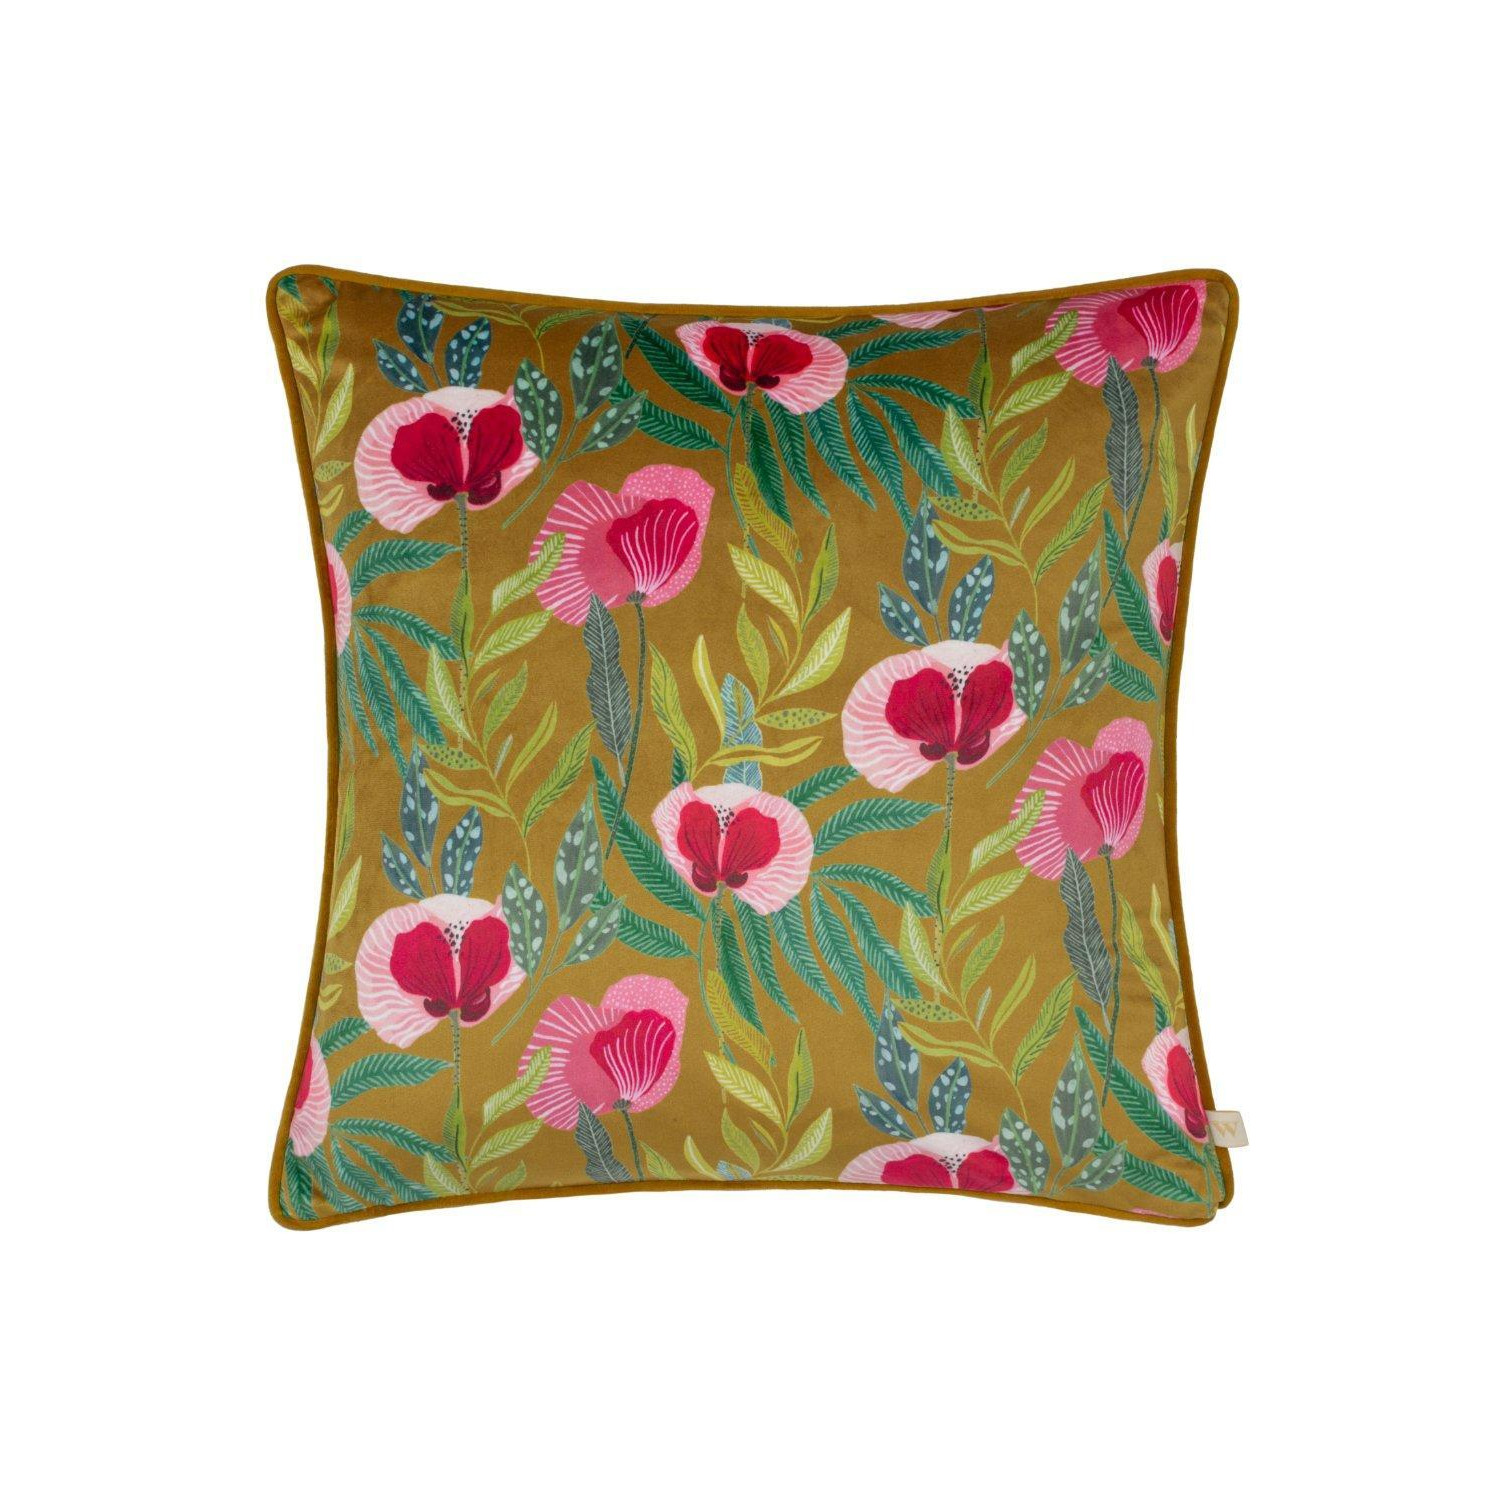 House of Bloom Poppy Piped Polyester Filled Cushion - image 1